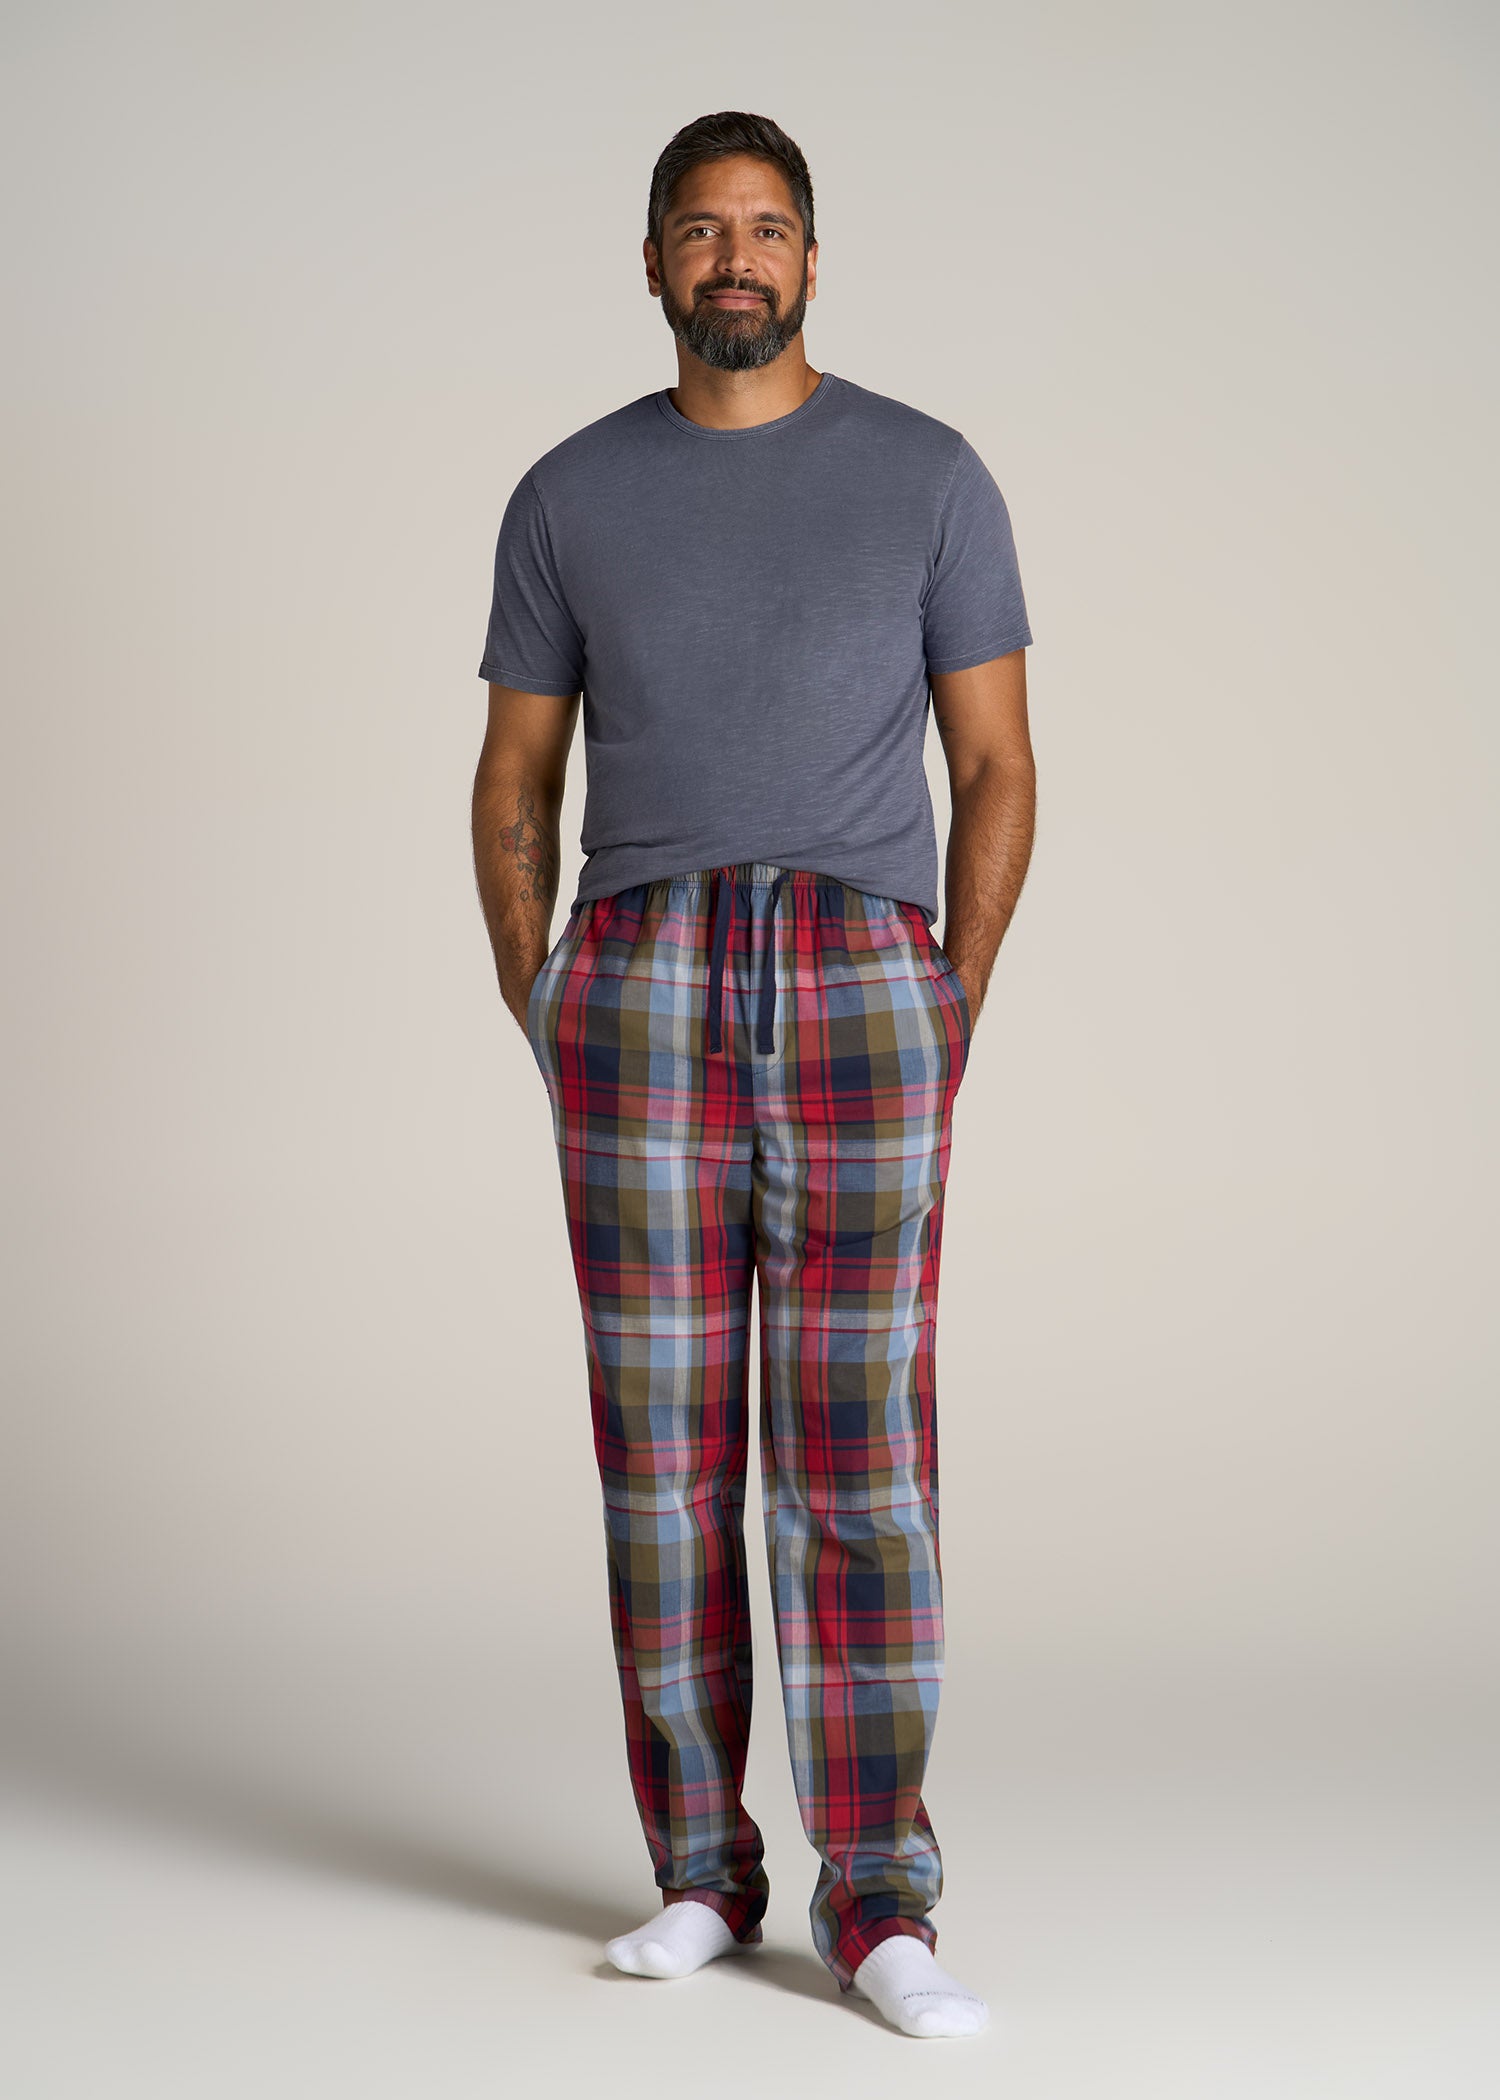 Woven Pajama Pants for Tall Men in Blue & Green Plaid